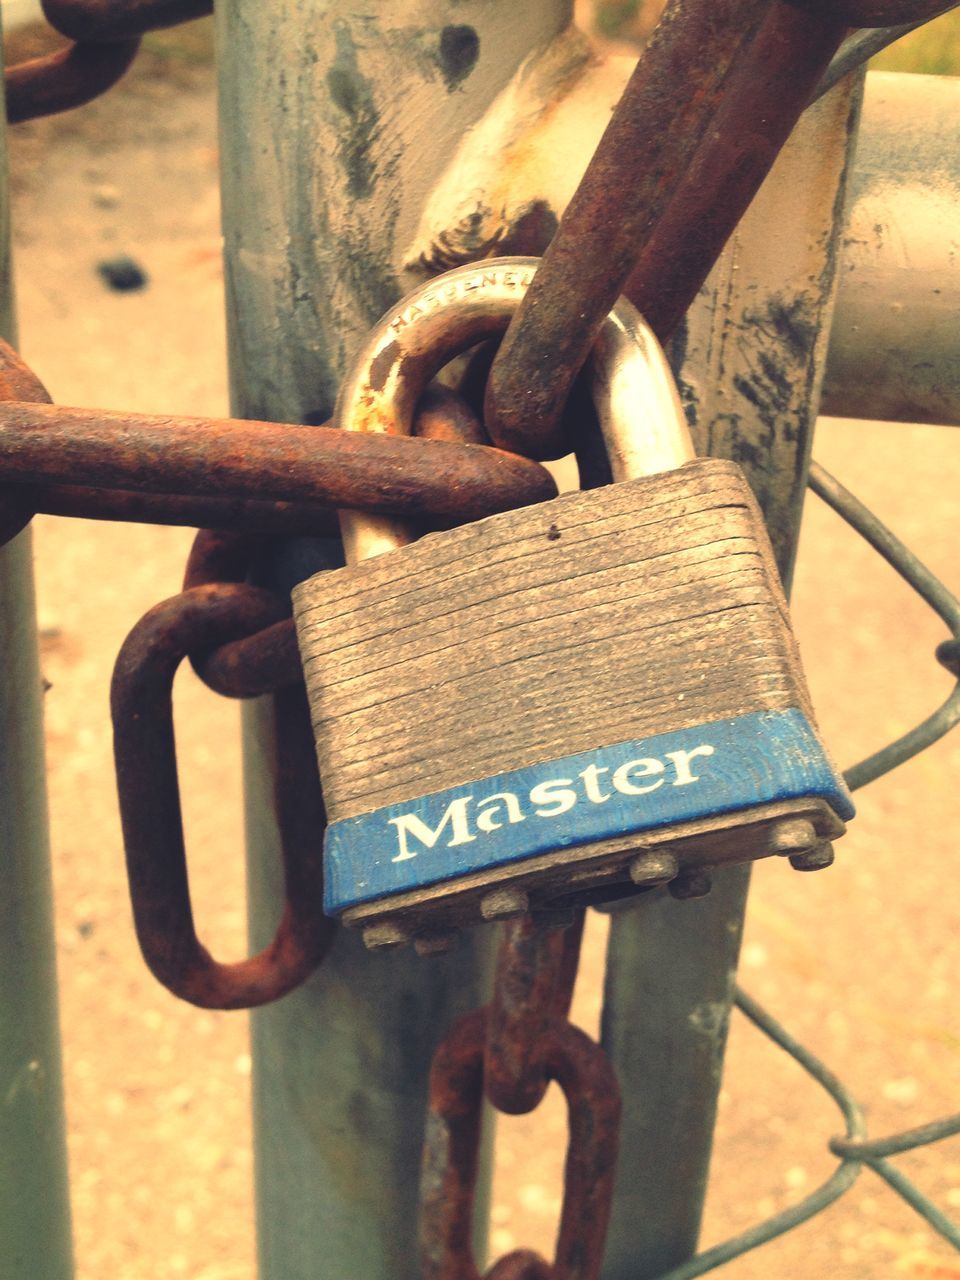 metal, metallic, close-up, rusty, focus on foreground, padlock, safety, chain, text, security, protection, lock, communication, western script, connection, fence, railing, day, strength, no people